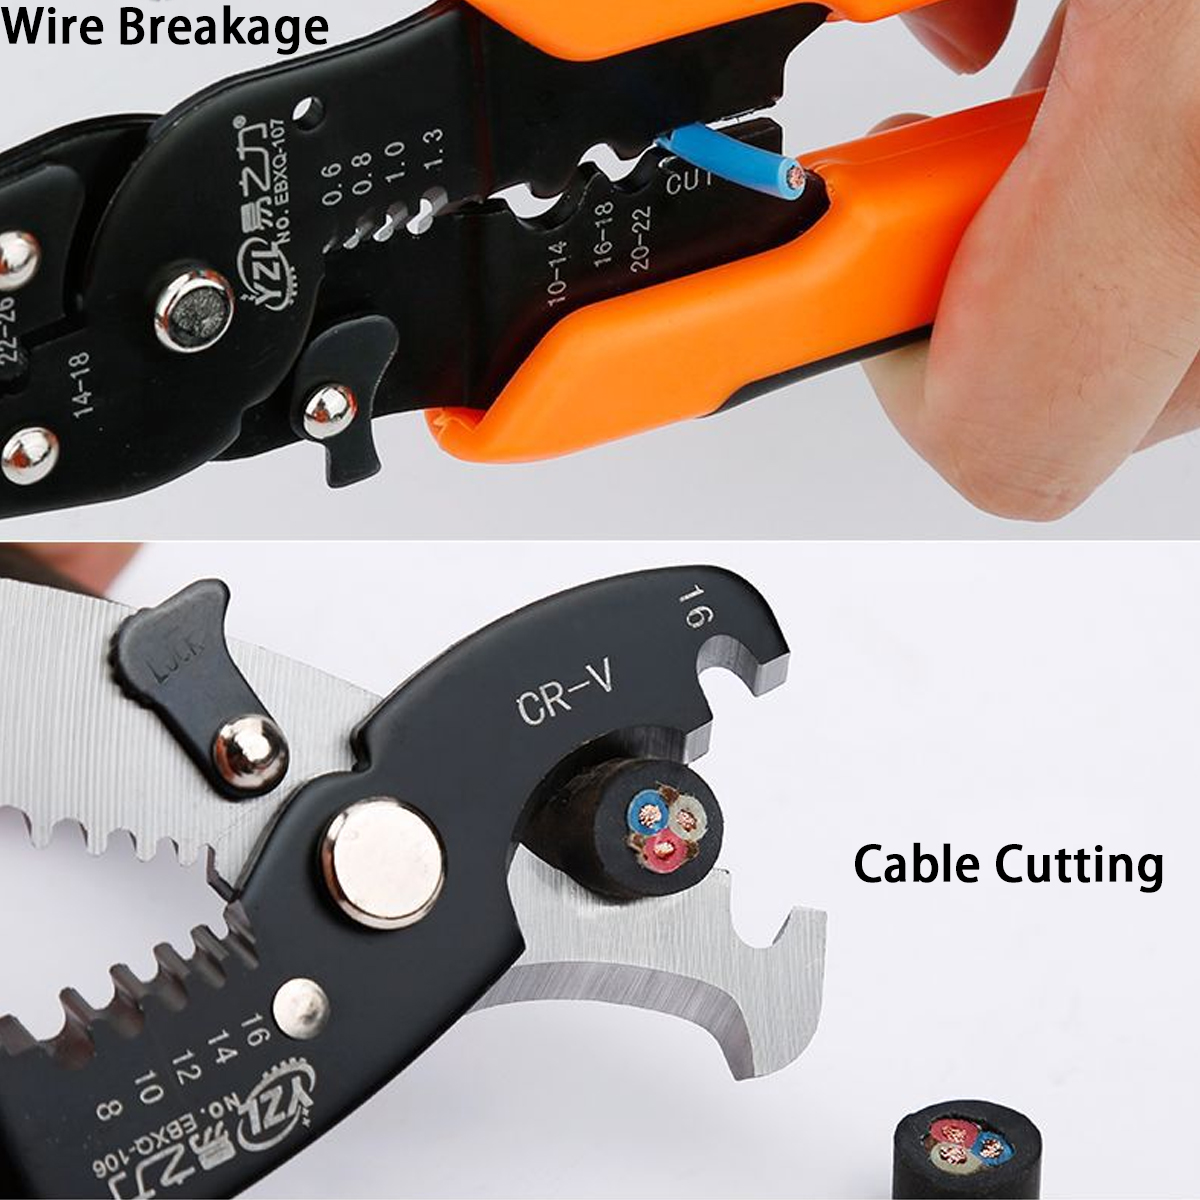 02-6mm-Multifunctional-Cable-Crimper-Cutter-Stripper-Decrustation-Wire-Pliers-1612405-6